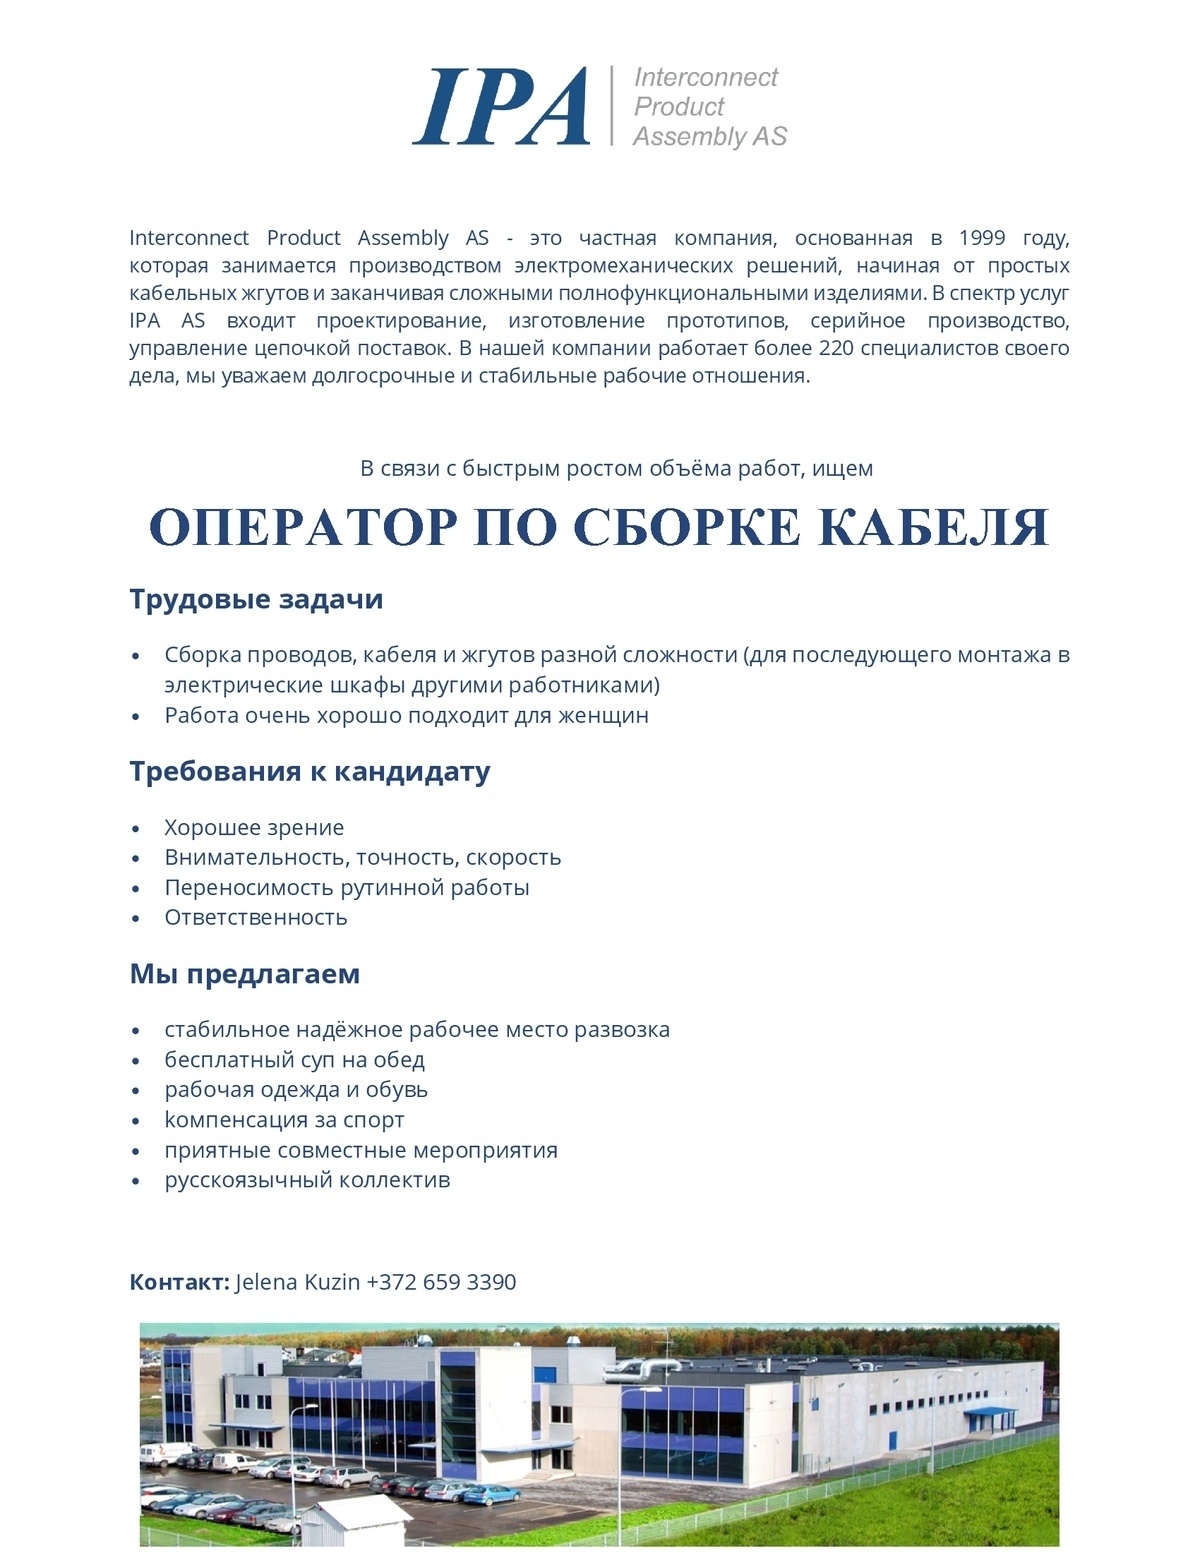 Interconnect Product Assembly AS ОПЕРАТОР ПО СБОРКЕ КАБЕЛЯ